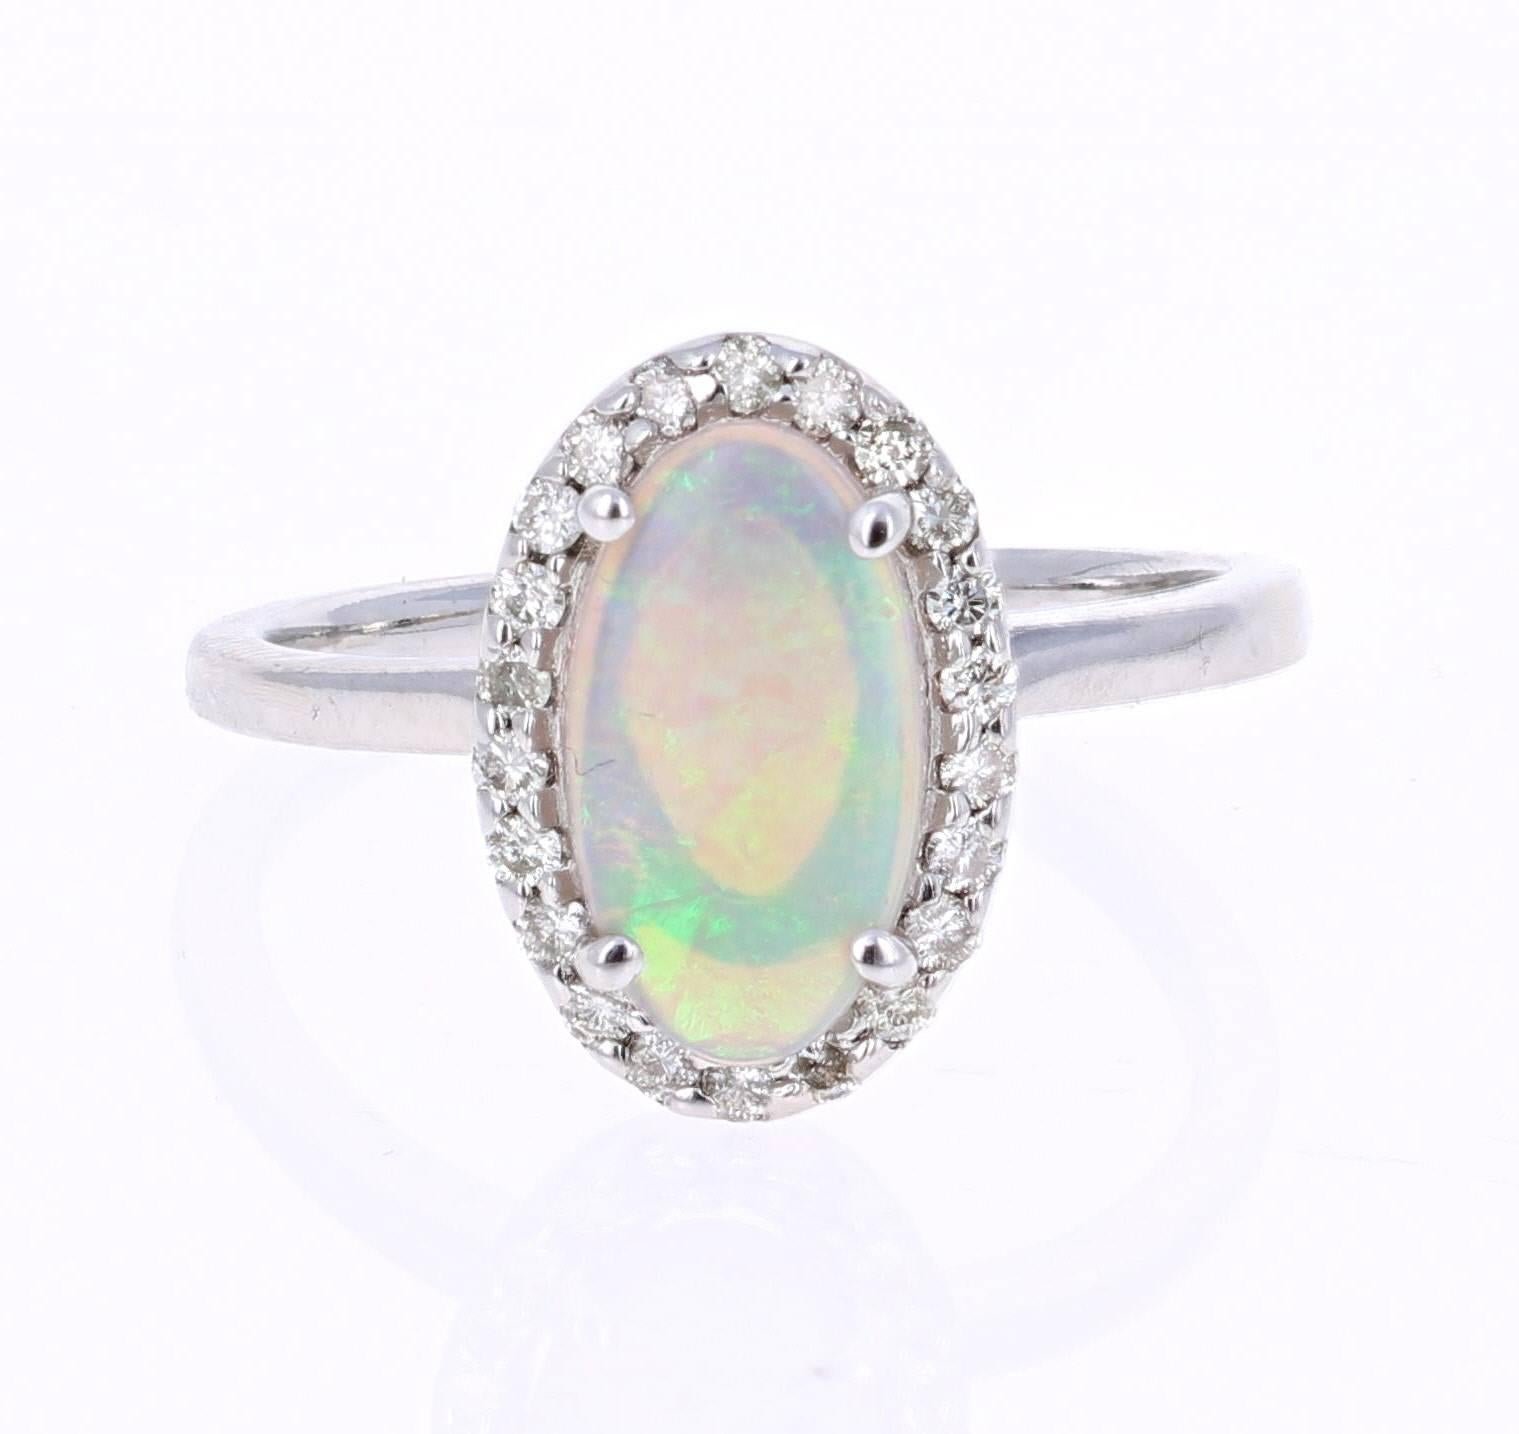 1.25 Carat Oval Cut Opal Diamond White Gold Cocktail Ring!

Cute and dainty ring that can be a great addition to anyone's accessory collection!   This ring has a 1.00 carat Oval Cut Opal that is set in the center of the ring and is surrounded by 22